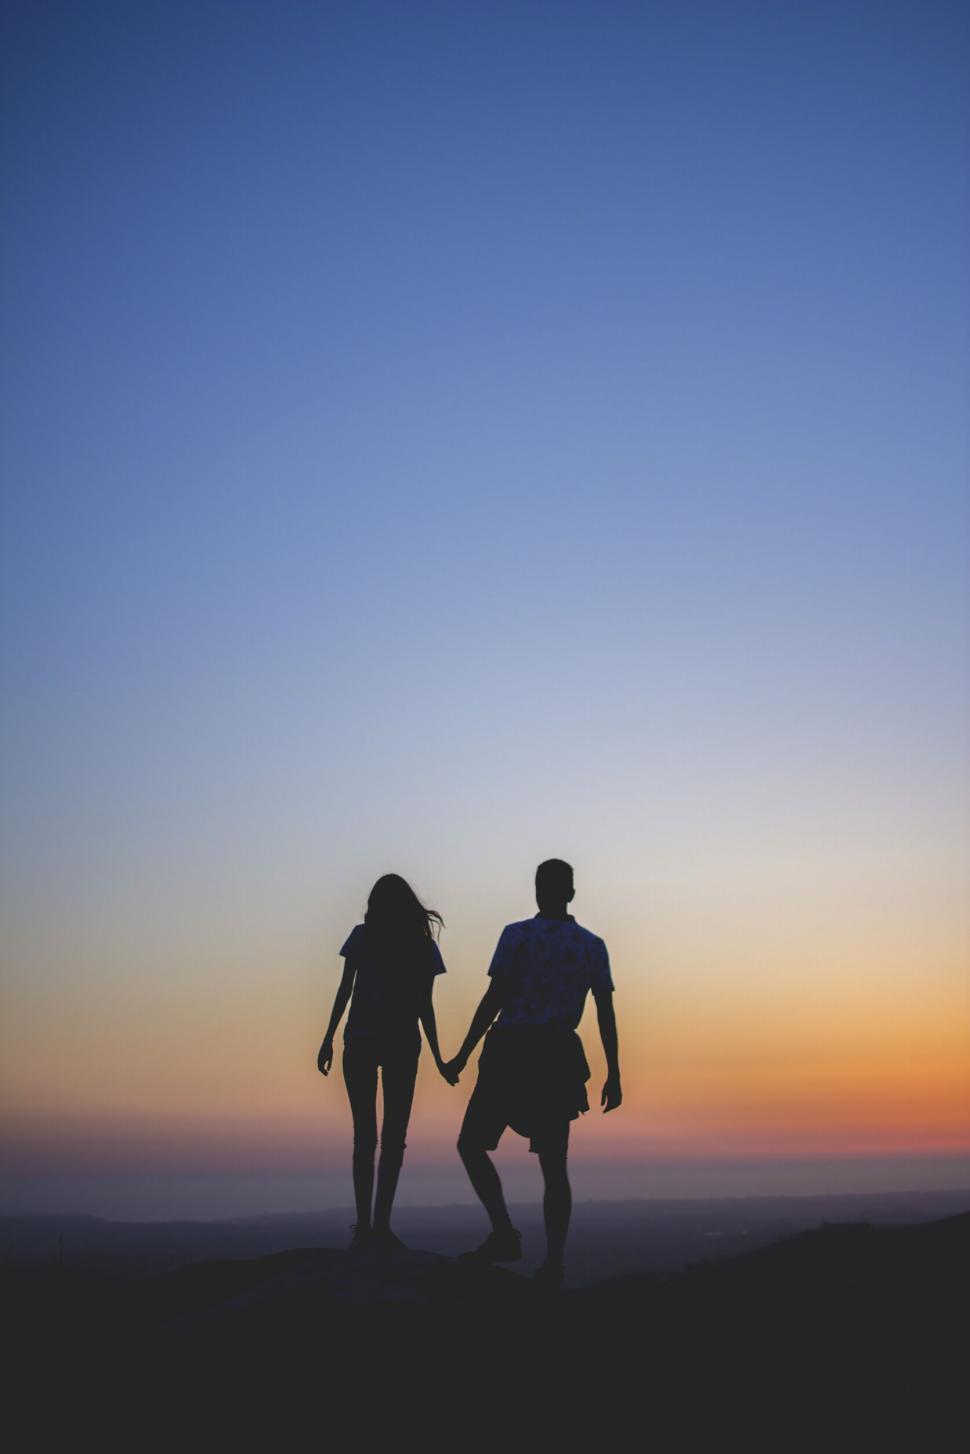 Free Image of Silhouette of couple holding hands at dusk 